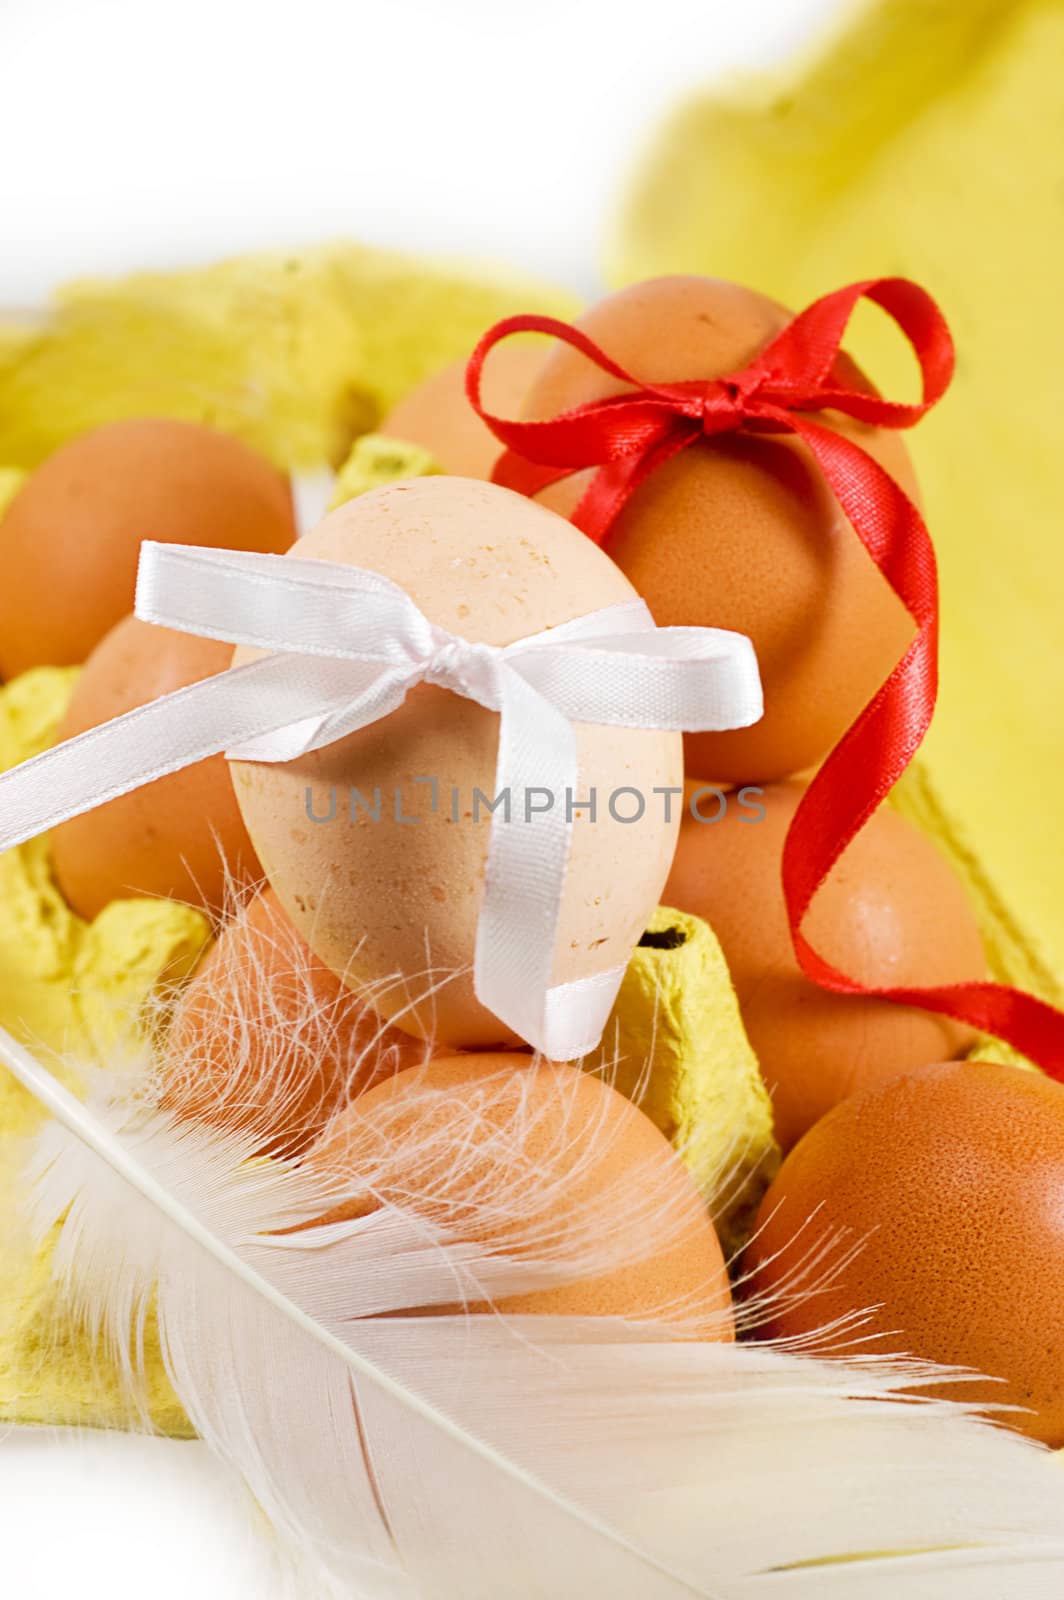 Eggs with red and white baw, easter concept